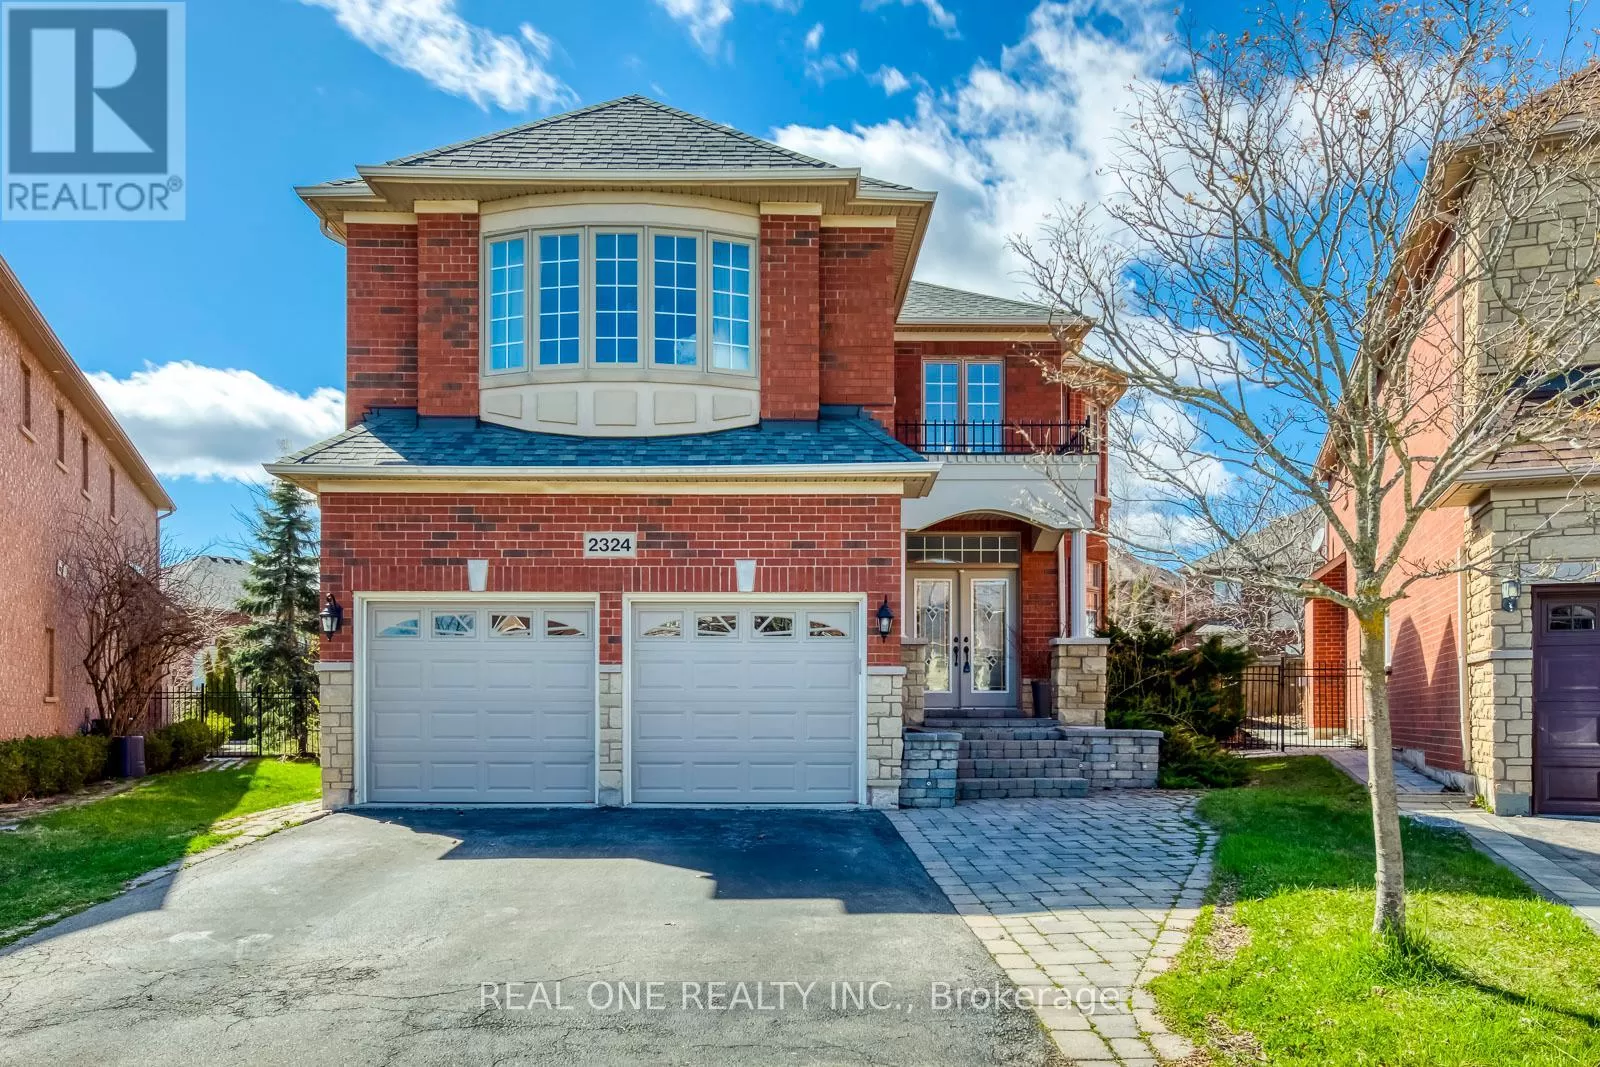 House for rent: 2324 Hertfordshire Way, Oakville, Ontario L6H 7M5